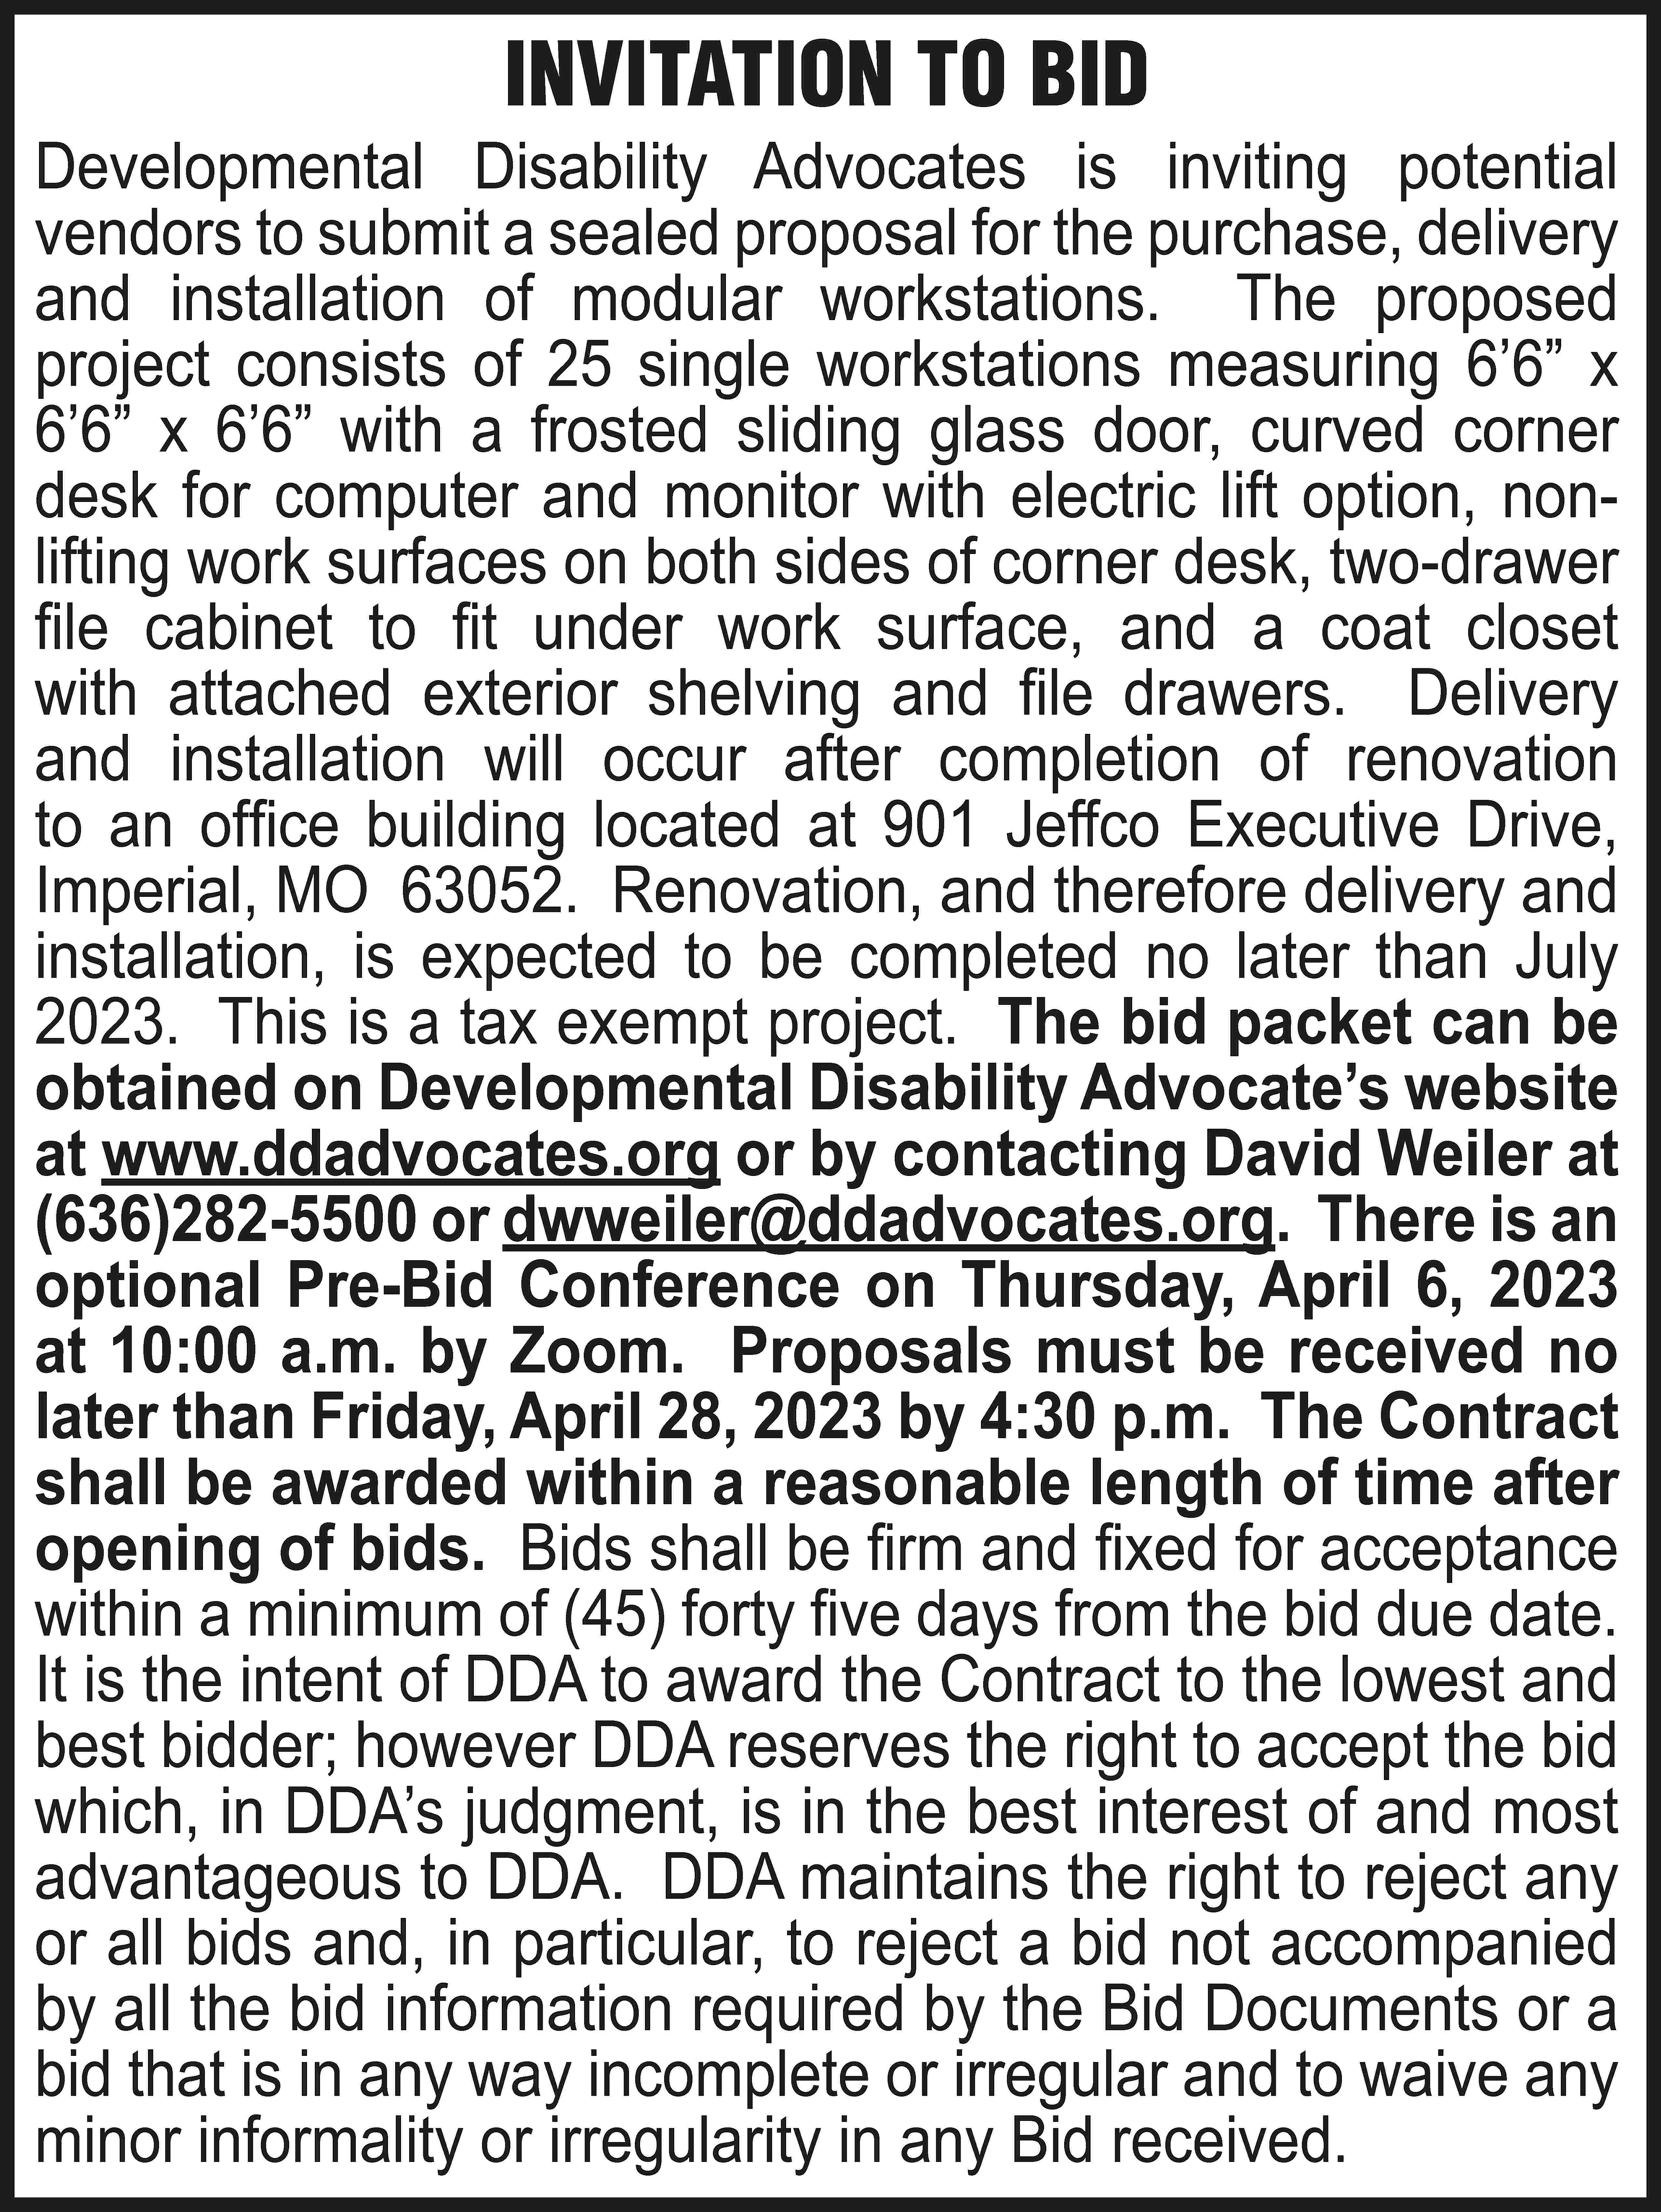 INVITATION TO BID Developmental Disability  INVITATION TO BID Developmental Disability Advocates is inviting potential vendors to submit a sealed proposal for the purchase, delivery and installation of modular workstations. The proposed project consists of 25 single workstations measuring 6’6” x 6’6” x 6’6” with a frosted sliding glass door, curved corner desk for computer and monitor with electric lift option, nonlifting work surfaces on both sides of corner desk, two-drawer file cabinet to fit under work surface, and a coat closet with attached exterior shelving and file drawers. Delivery and installation will occur after completion of renovation to an office building located at 901 Jeffco Executive Drive, Imperial, MO 63052. Renovation, and therefore delivery and installation, is expected to be completed no later than July 2023. This is a tax exempt project. The bid packet can be obtained on Developmental Disability Advocate’s website at www.ddadvocates.org or by contacting David Weiler at (636)282-5500 or dwweiler@ddadvocates.org. There is an optional Pre-Bid Conference on Thursday, April 6, 2023 at 10:00 a.m. by Zoom. Proposals must be received no later than Friday, April 28, 2023 by 4:30 p.m. The Contract shall be awarded within a reasonable length of time after opening of bids. Bids shall be firm and fixed for acceptance within a minimum of (45) forty five days from the bid due date. It is the intent of DDA to award the Contract to the lowest and best bidder; however DDA reserves the right to accept the bid which, in DDA’s judgment, is in the best interest of and most advantageous to DDA. DDA maintains the right to reject any or all bids and, in particular, to reject a bid not accompanied by all the bid information required by the Bid Documents or a bid that is in any way incomplete or irregular and to waive any minor informality or irregularity in any Bid received.